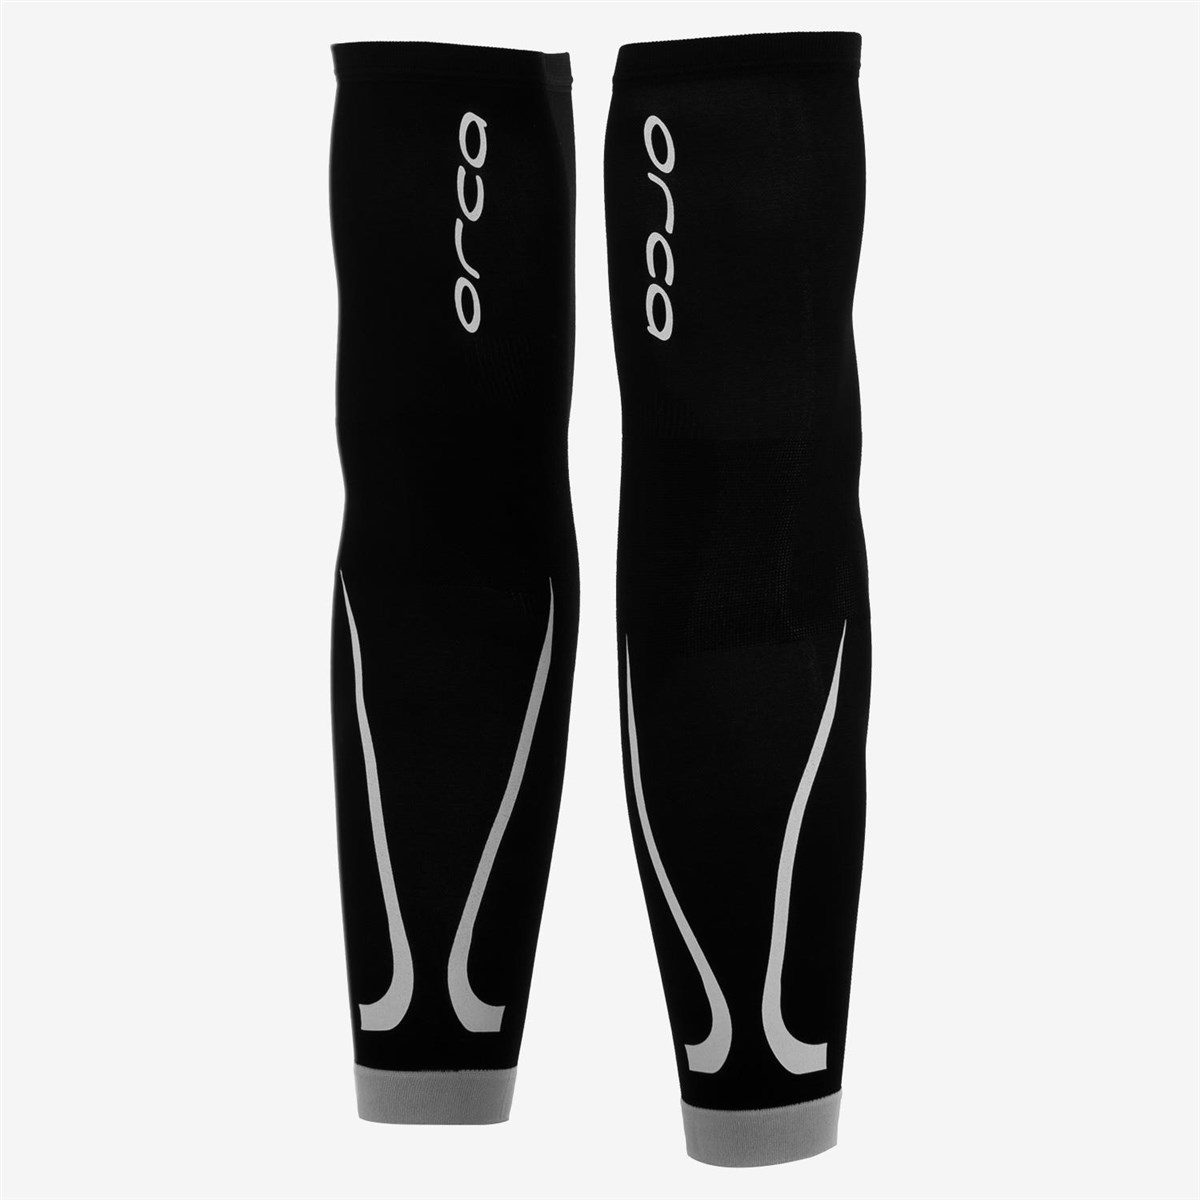 Orca Compression Arm Sleeve product image